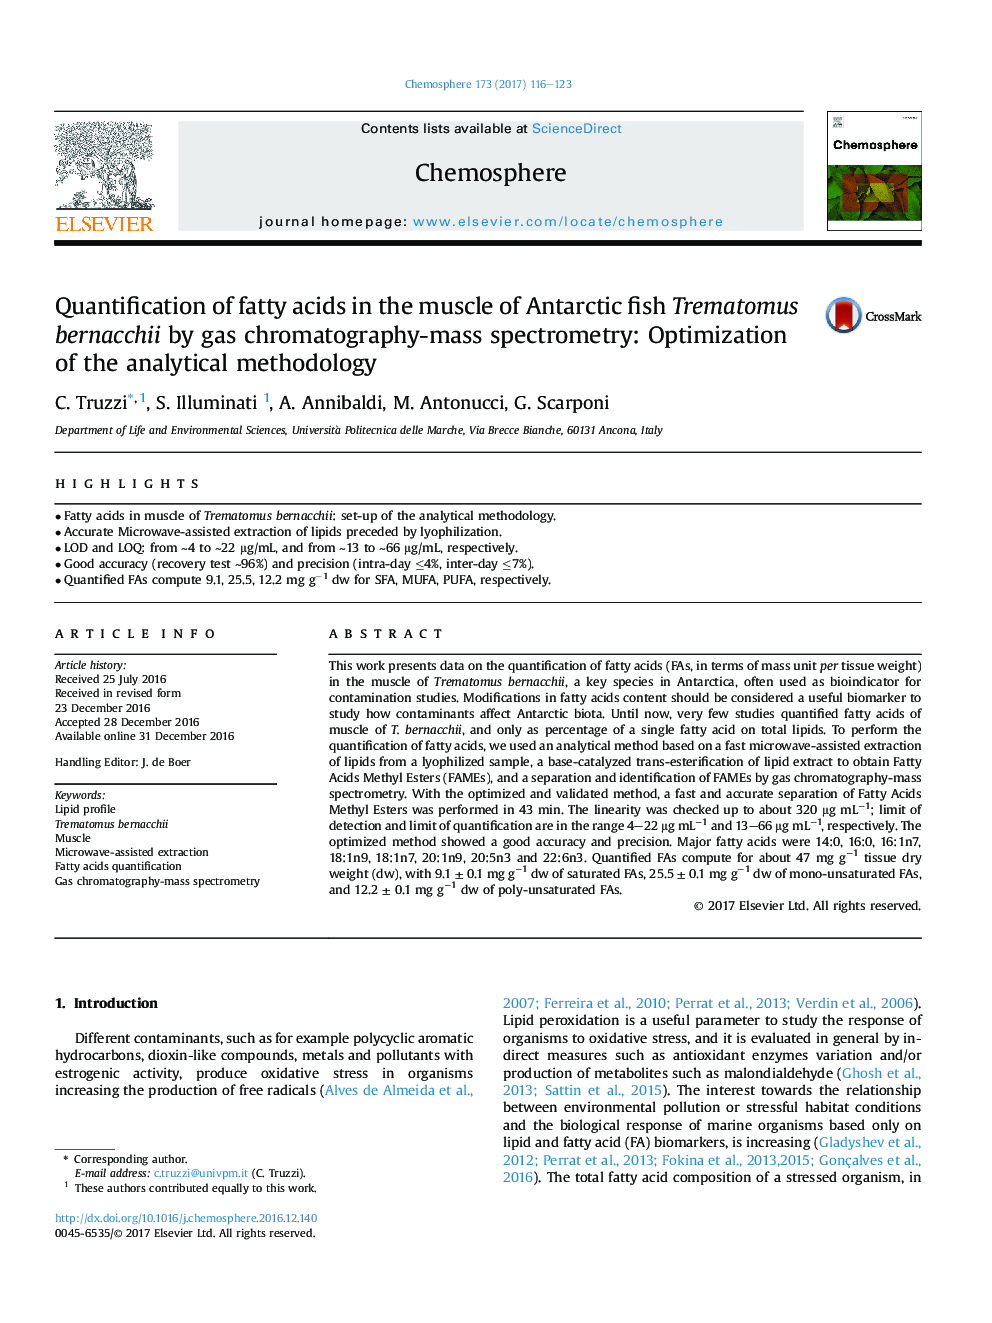 Quantification of fatty acids in the muscle of Antarctic fish Trematomus bernacchii by gas chromatography-mass spectrometry: Optimization of the analytical methodology